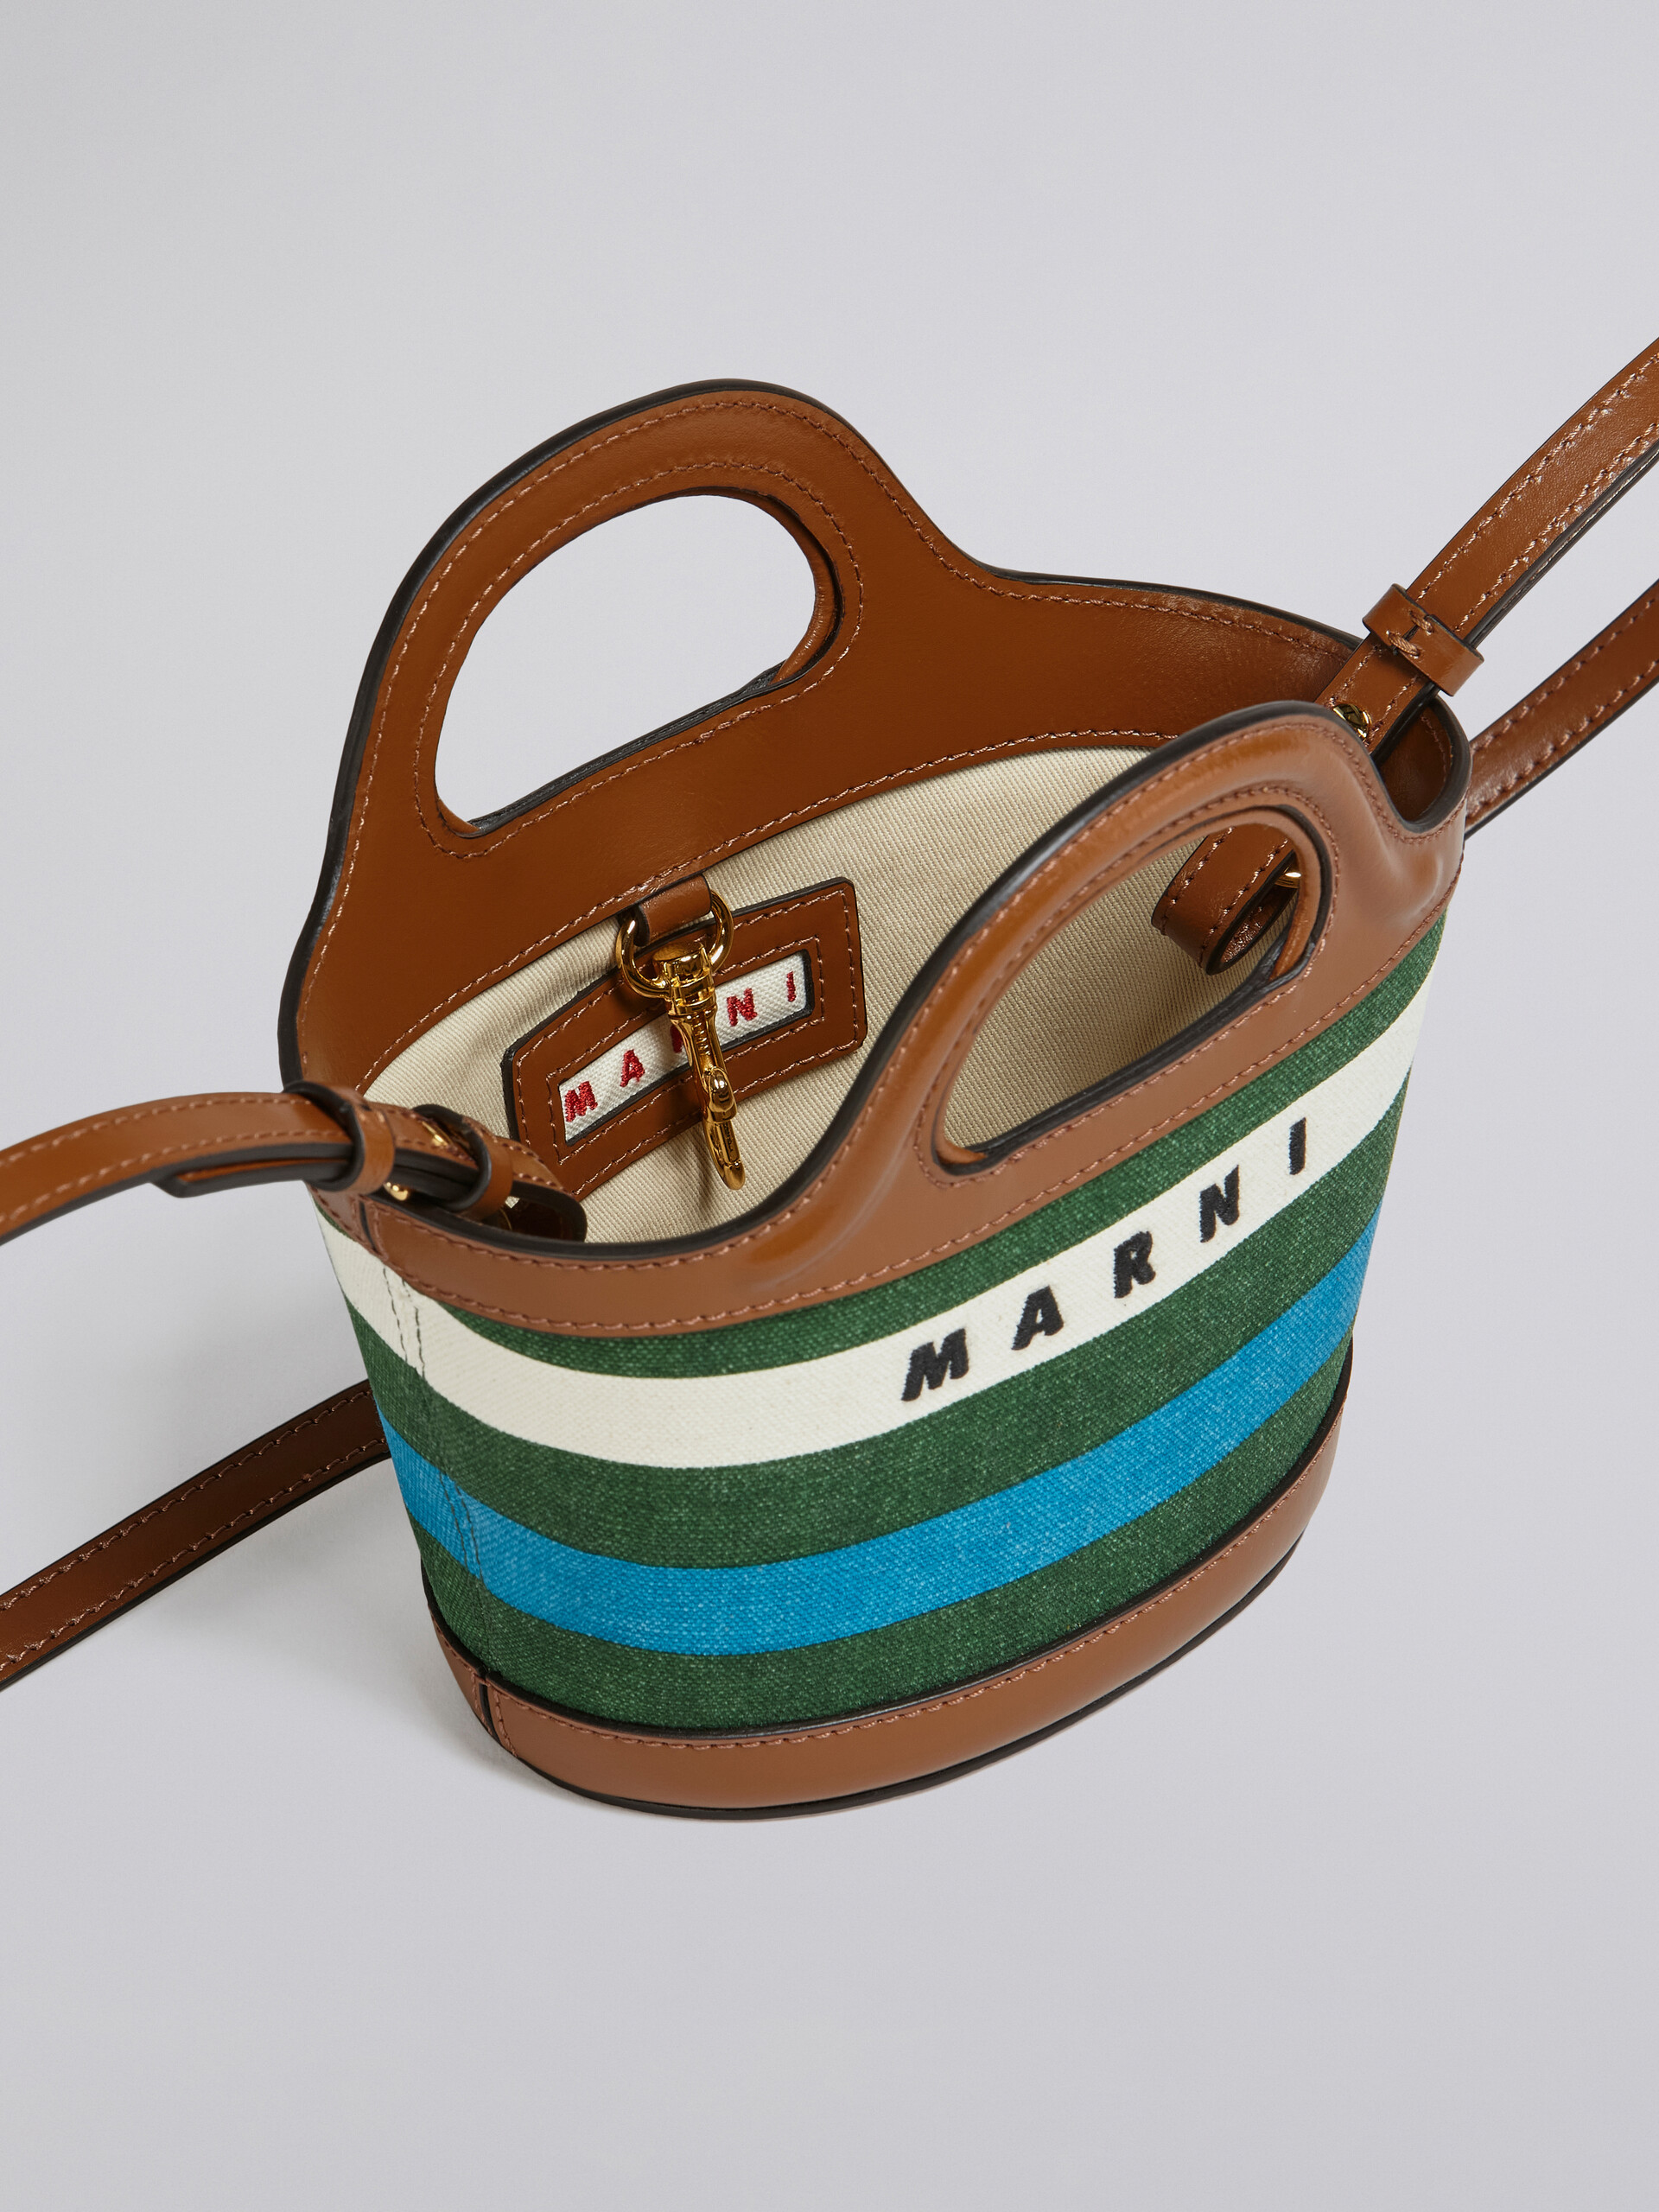 TROPICALIA micro bag in leather and striped canvas - Handbag - Image 4